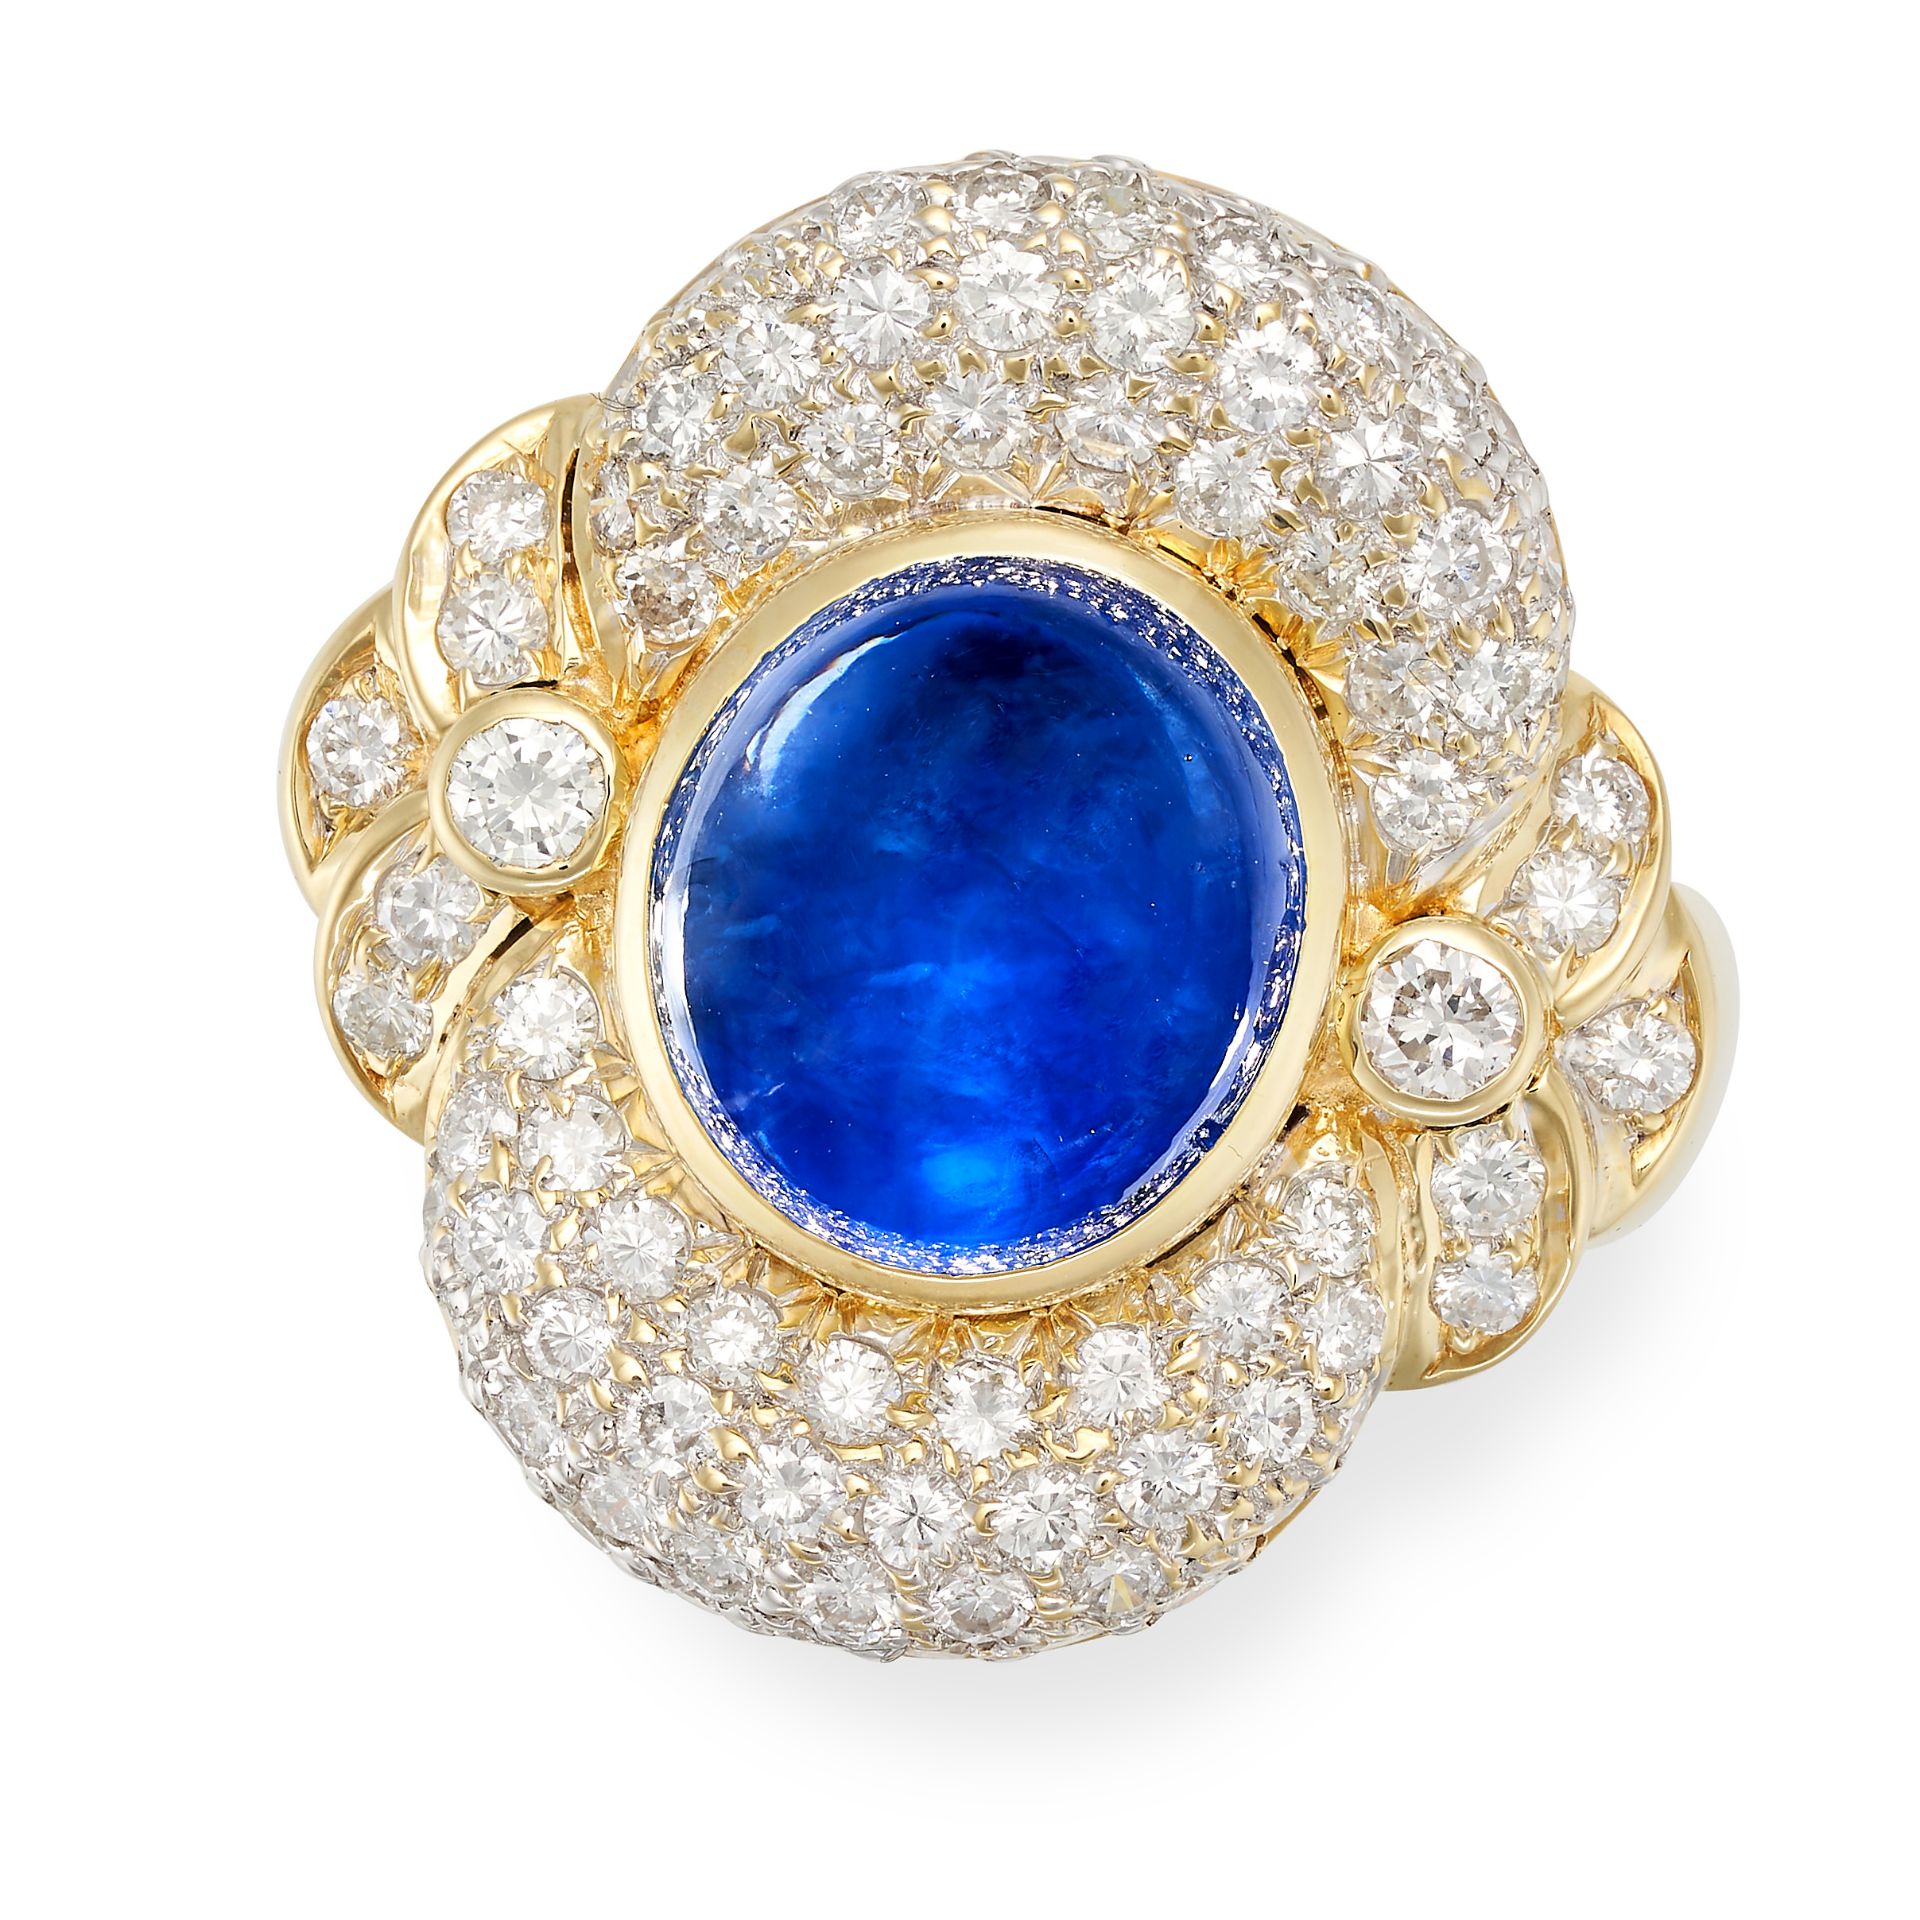 A SAPPHIRE AND DIAMOND DRESS RING in 18ct yellow gold, set with an oval cabochon sapphire of appr...